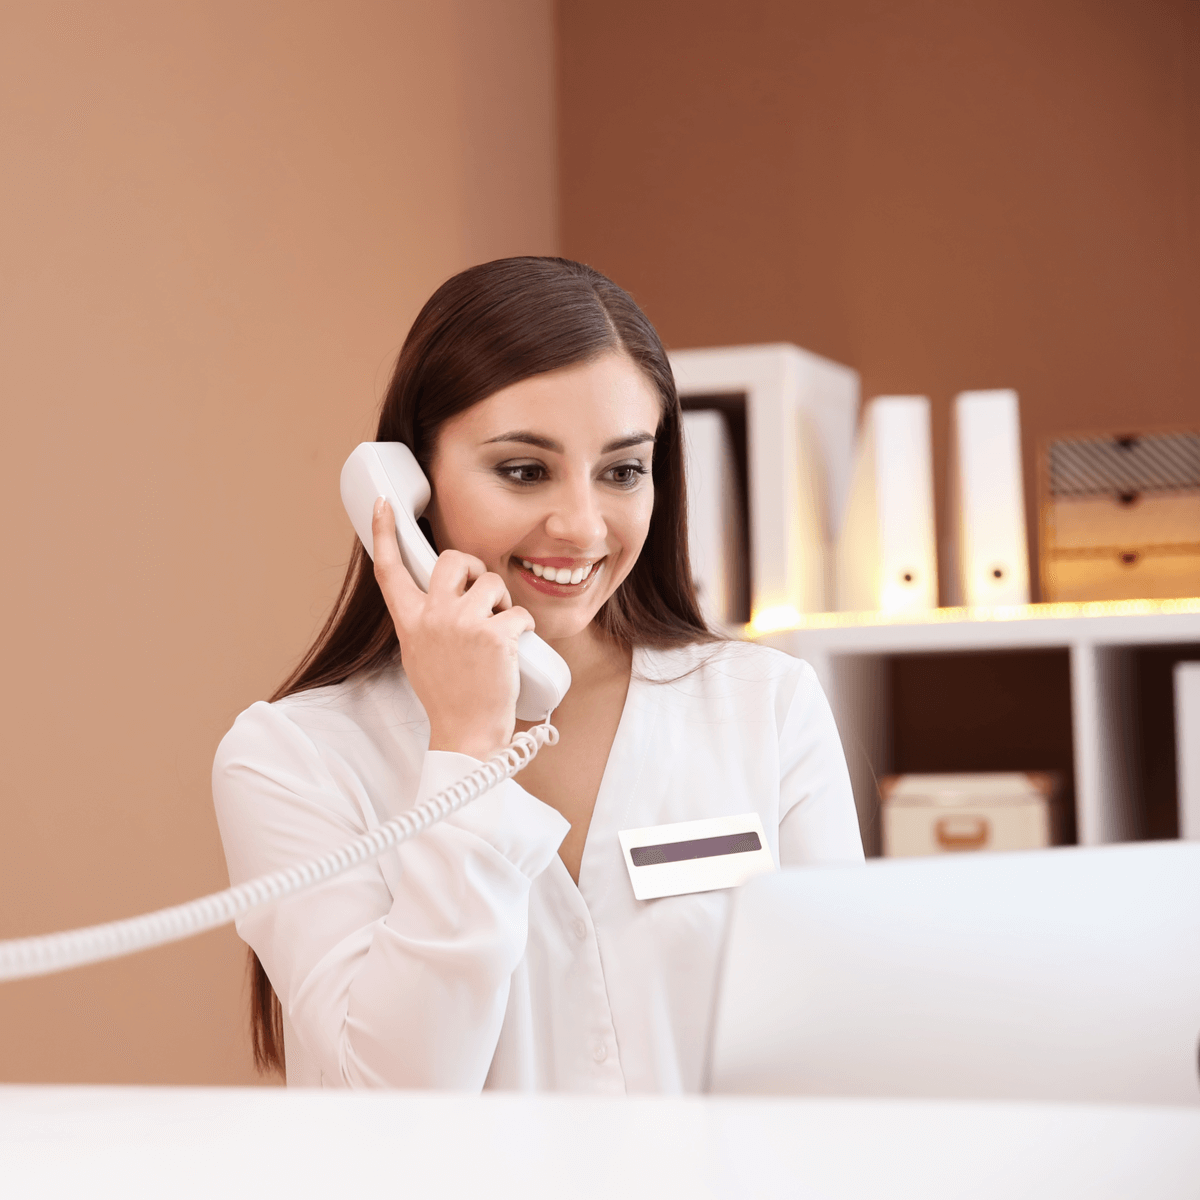 best automated receptionist software